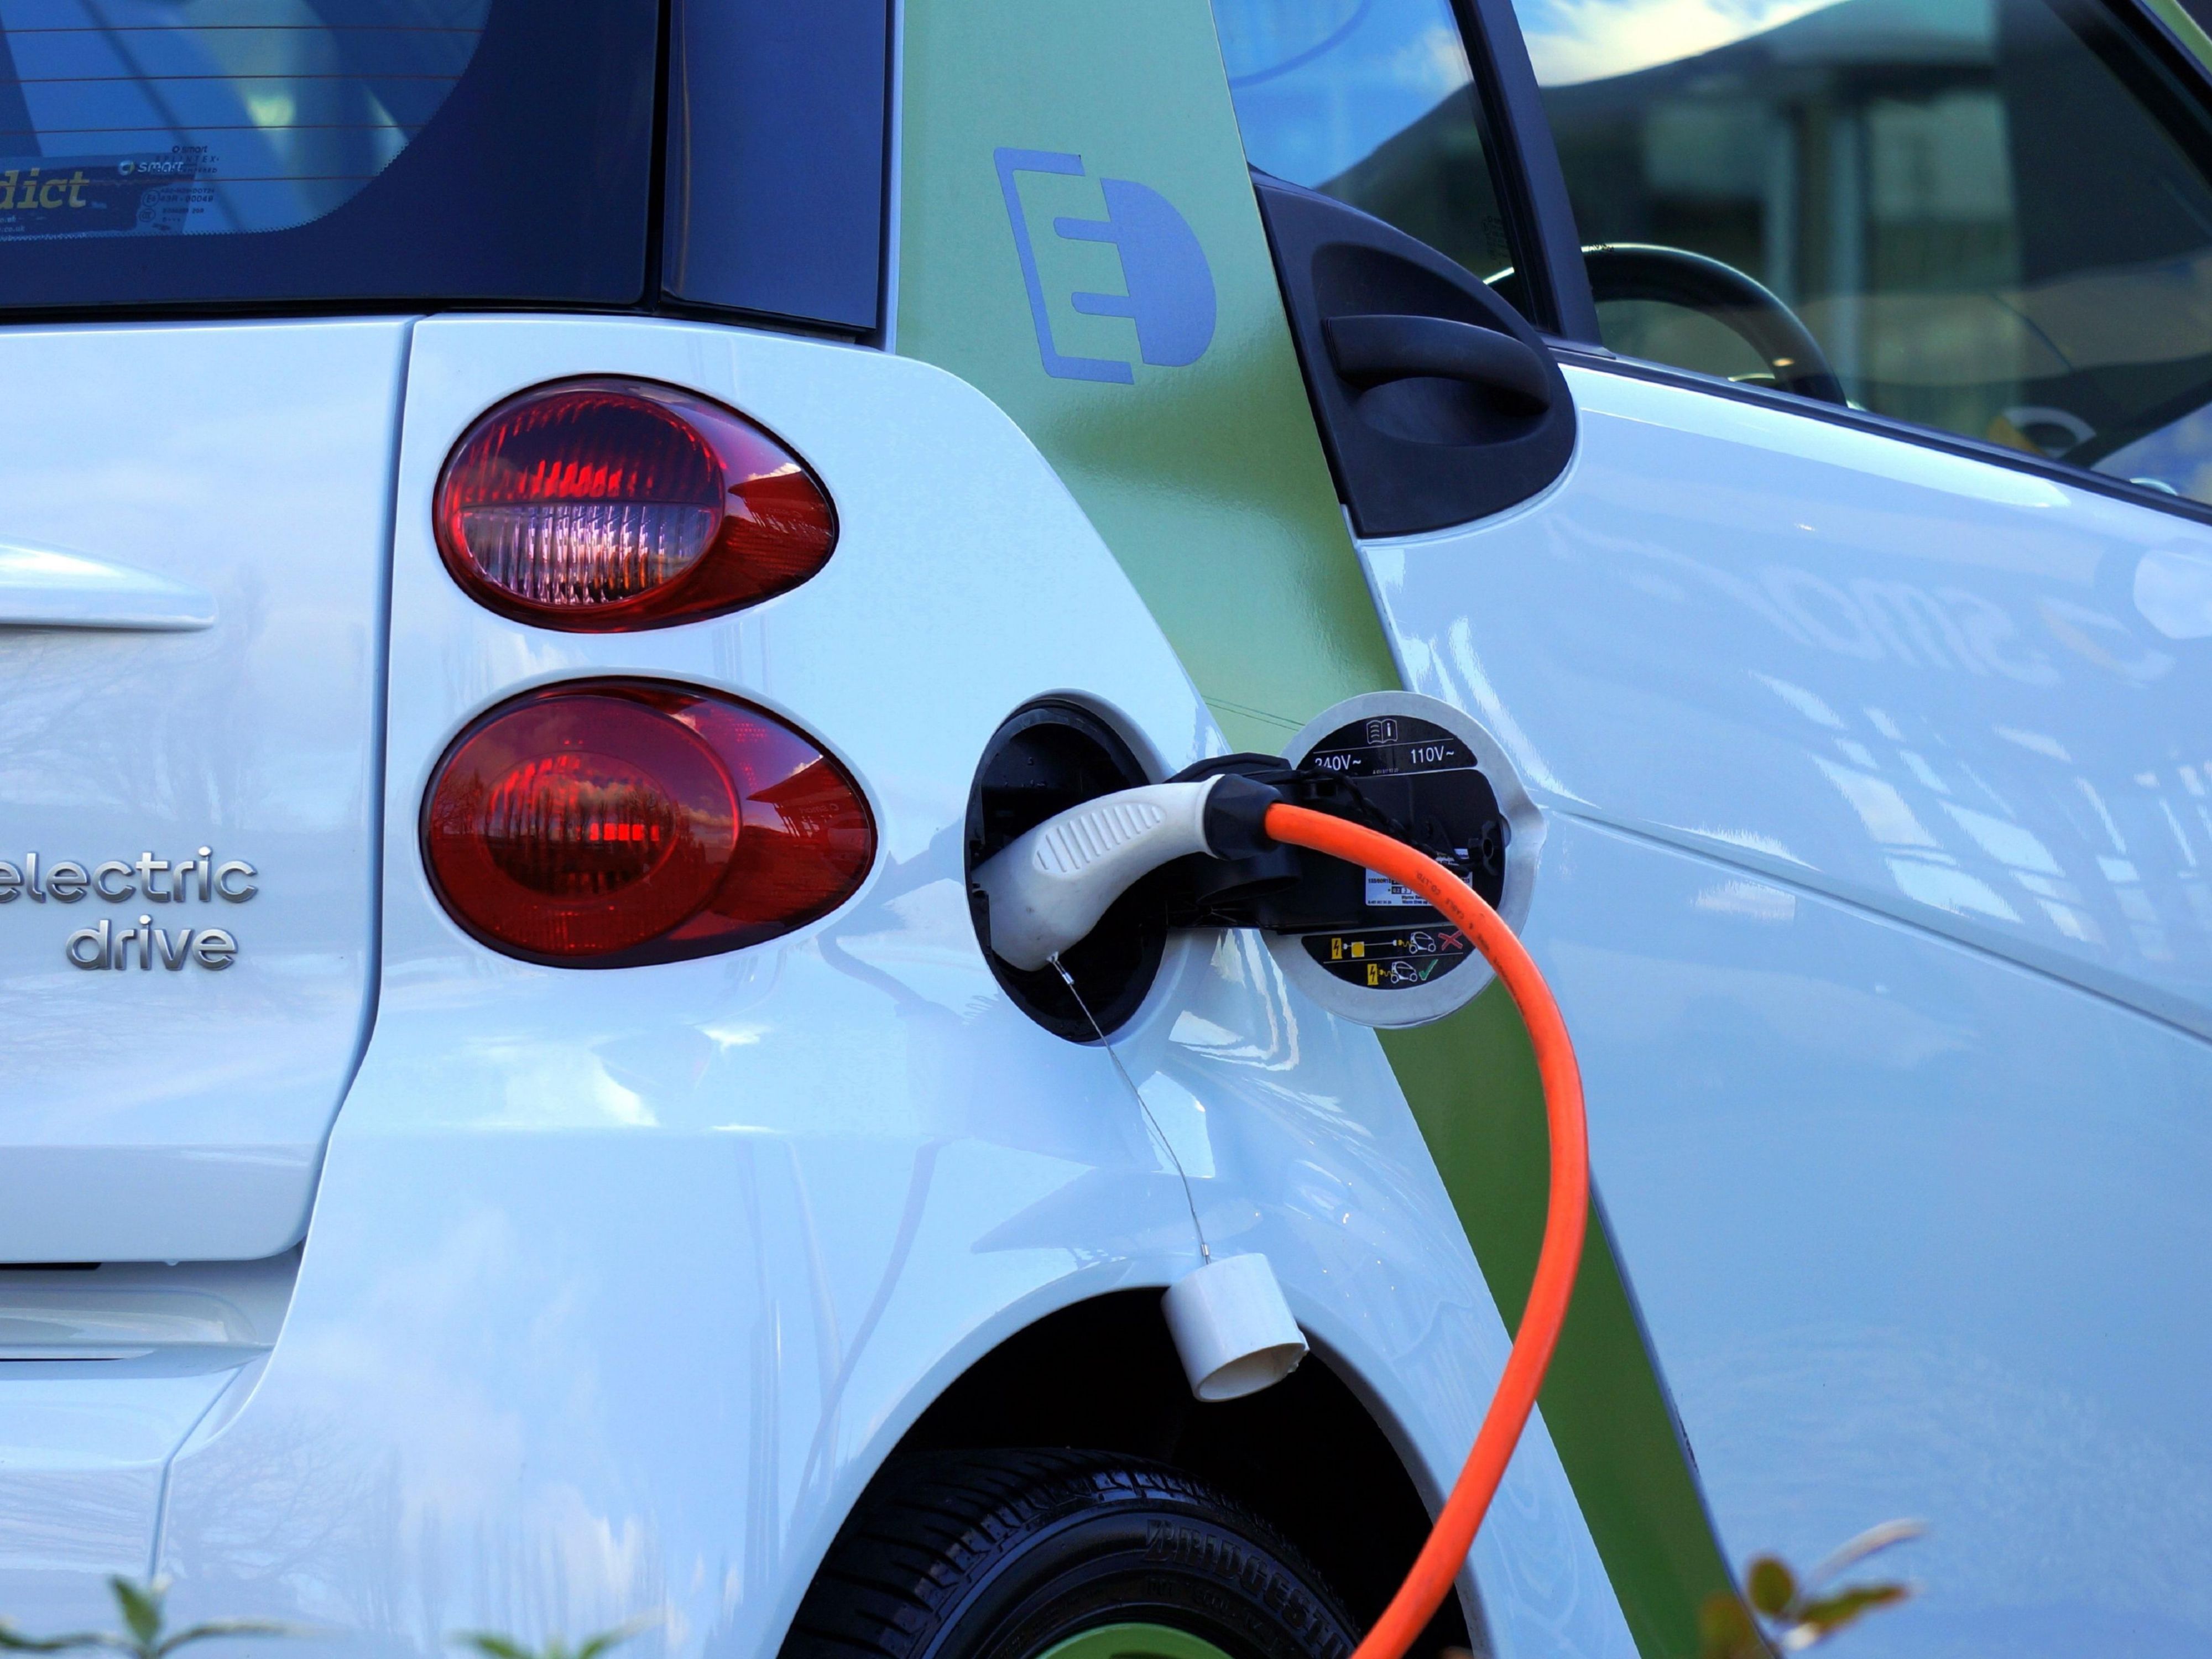 While you are relaxing, so should your car!  Our hotel is equipped with Electric Vehicle Charging Stations (EVC).  Please contact us to verify we can support your car's needs.  There is a fee based on the power consumed - estimated at $2 per hour.  This service is available through the Charge Point app.